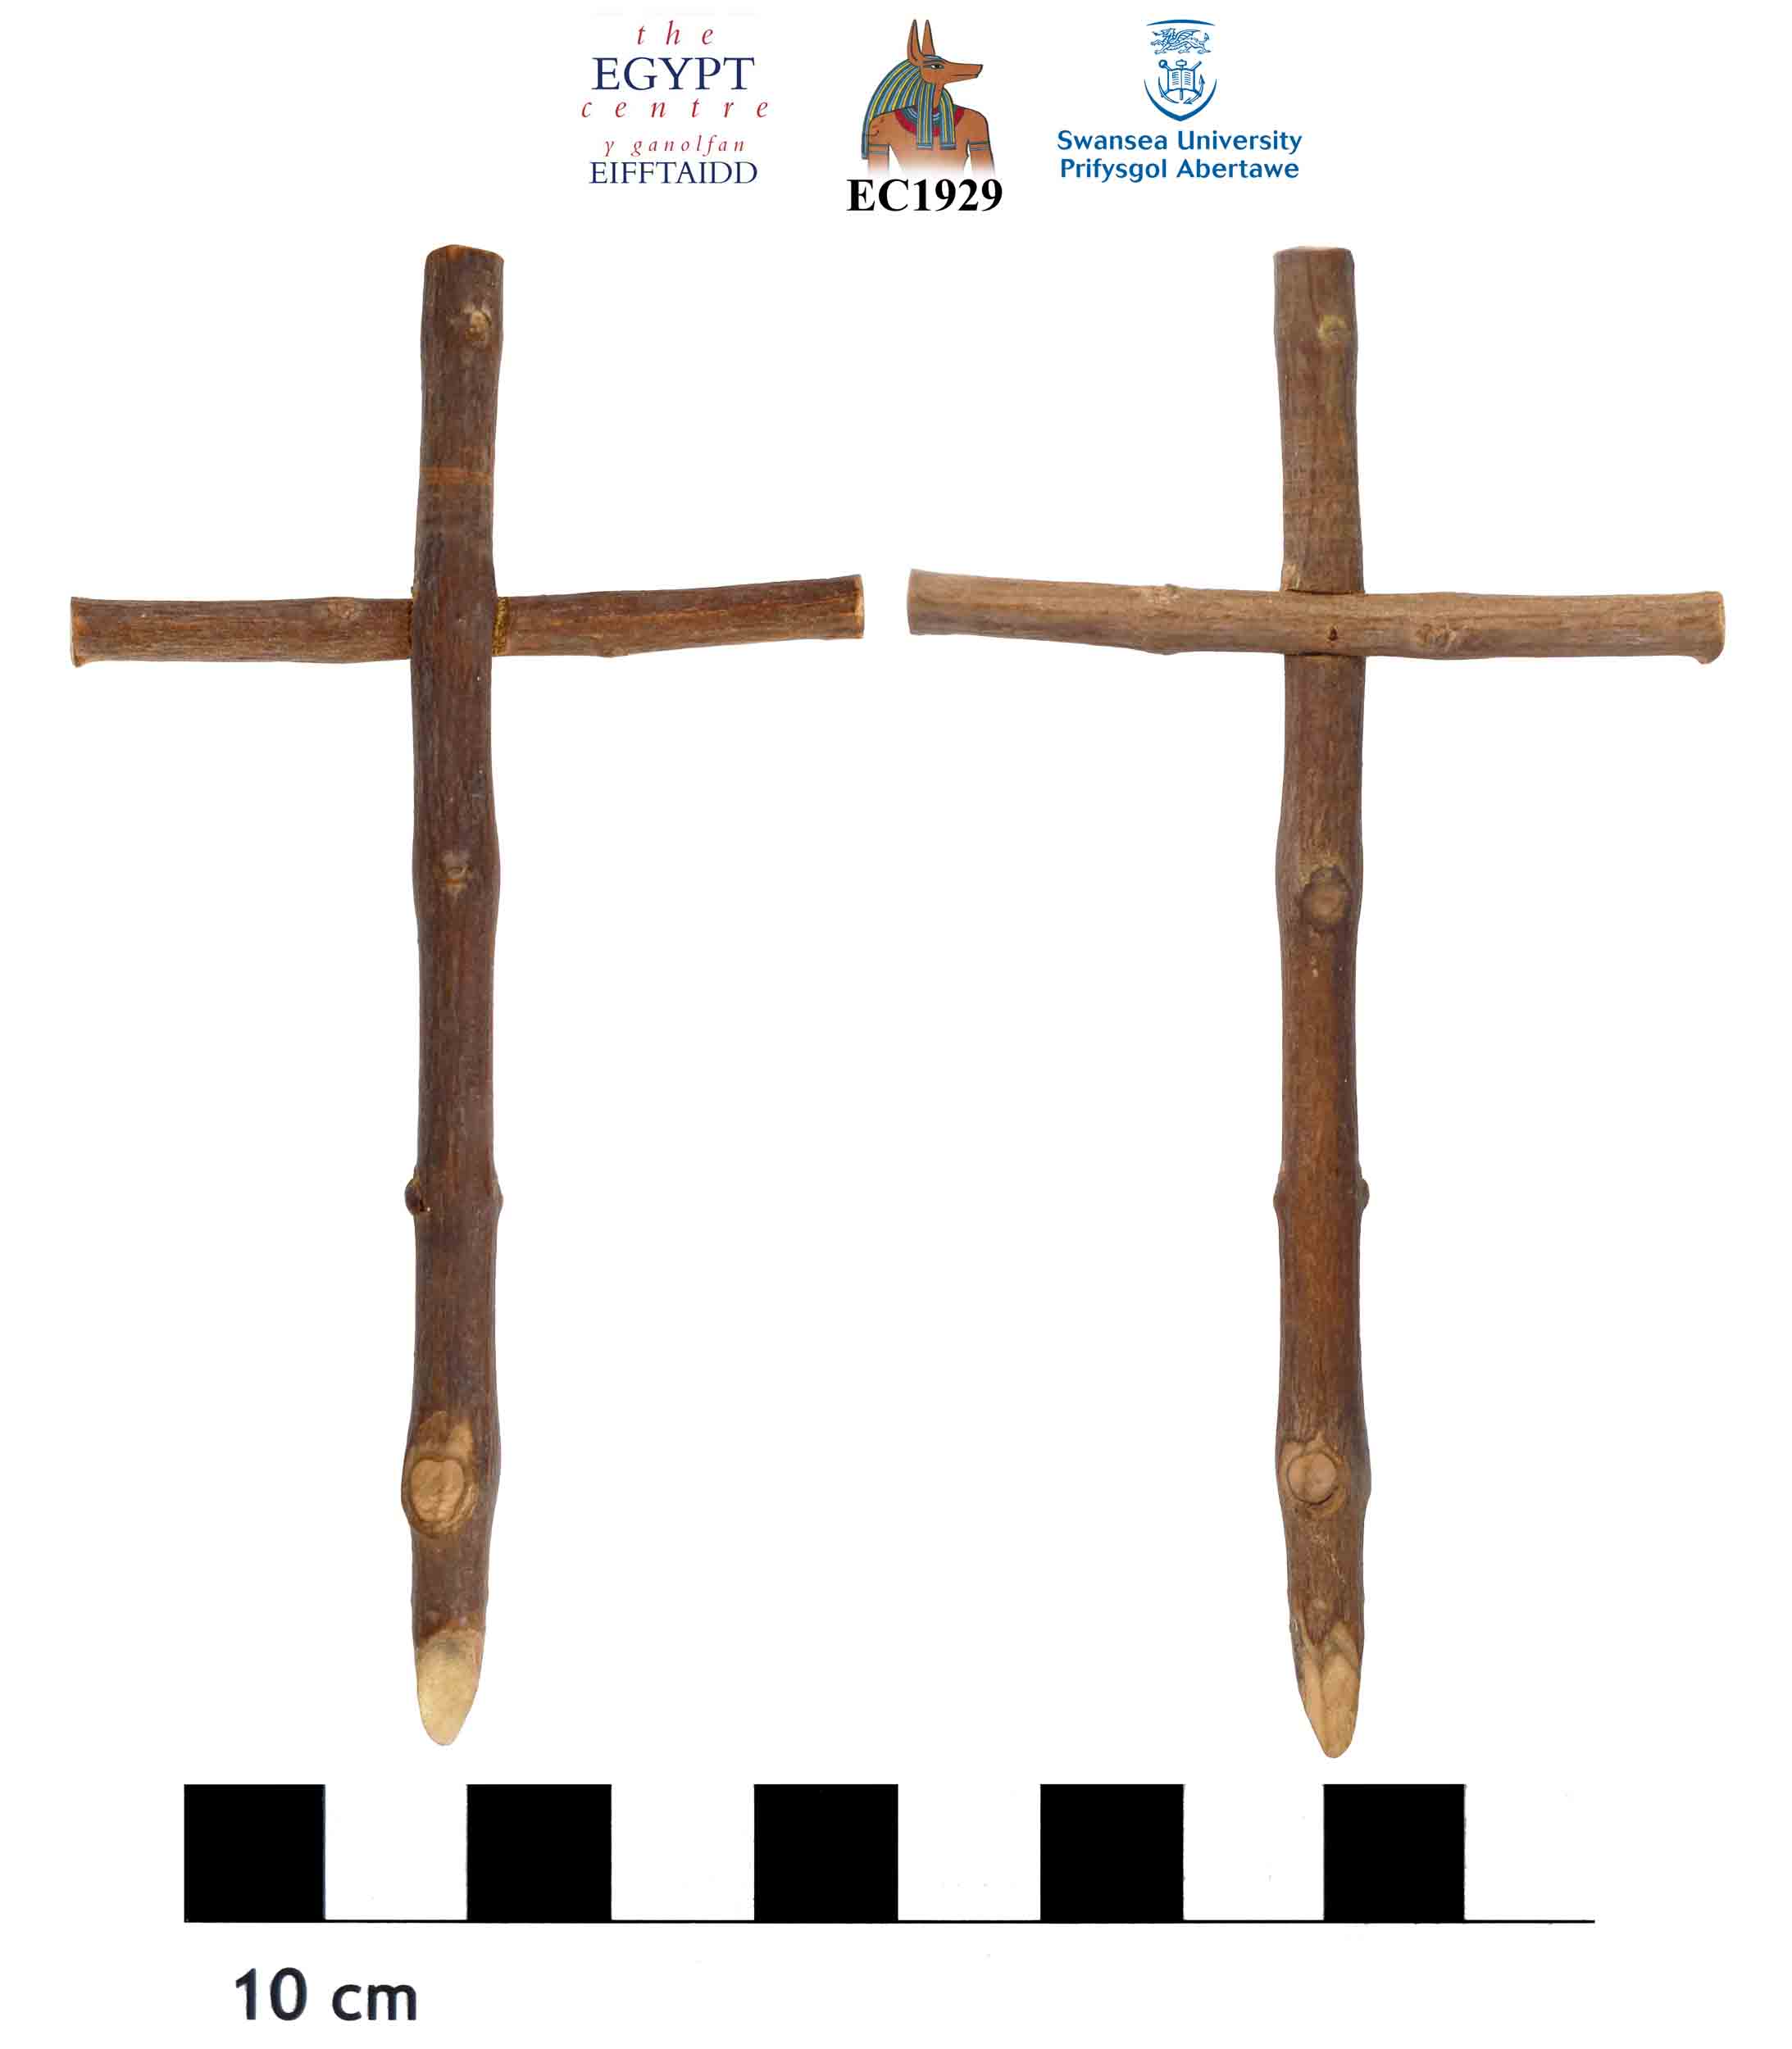 Image for: Wooden cross